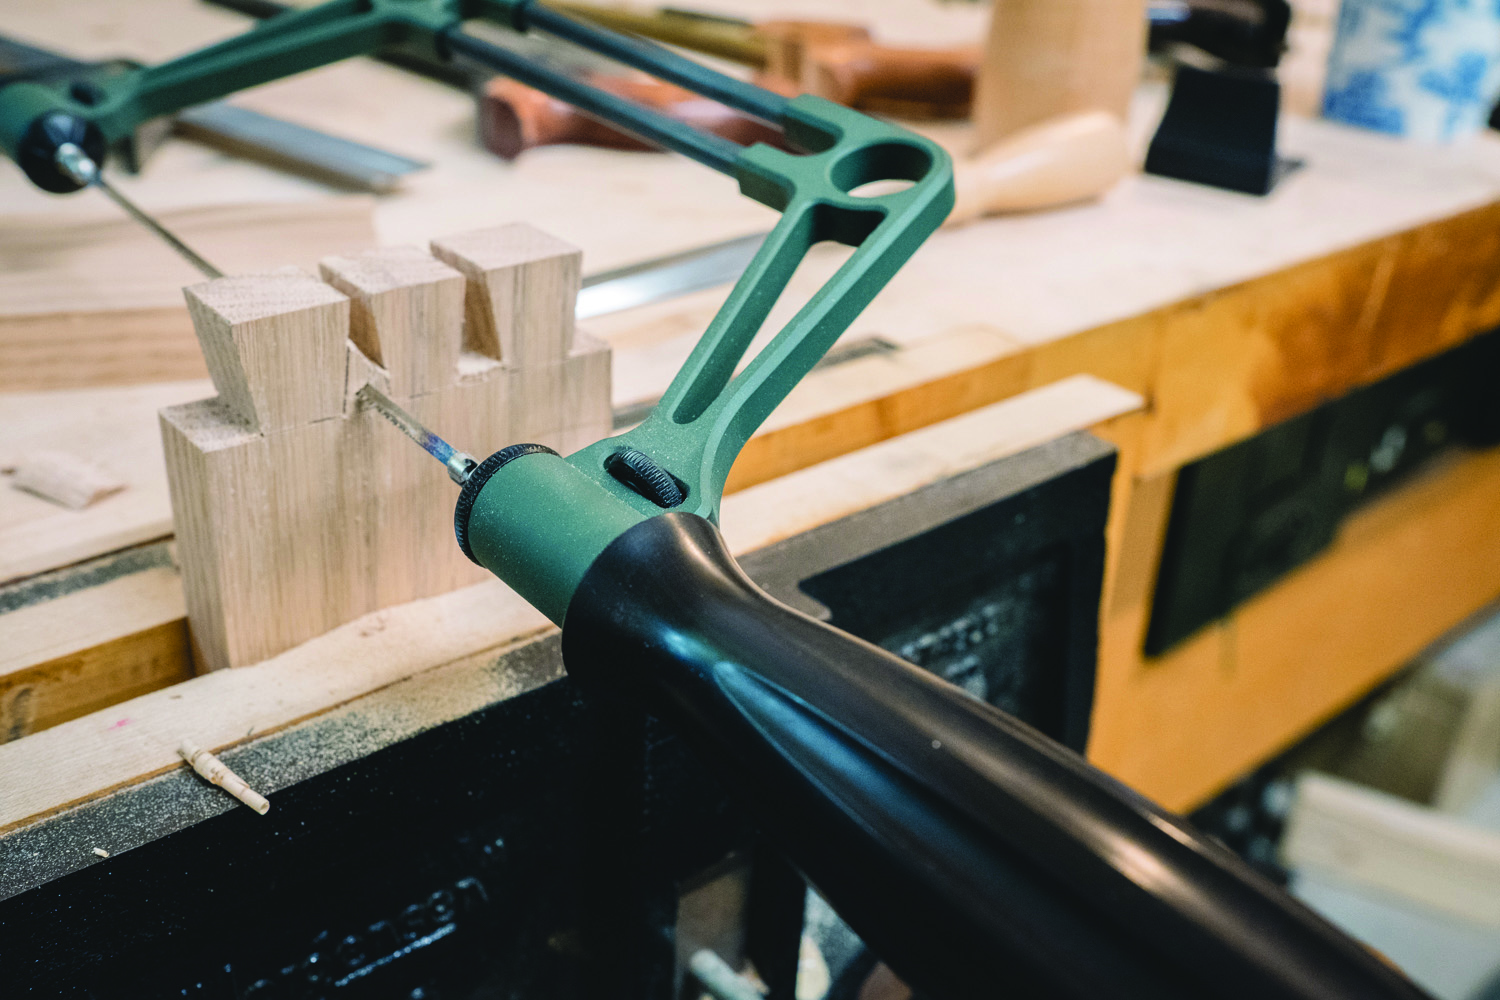 Tool Review: Ultimate Coping Saw by Blue Spruce Toolworks